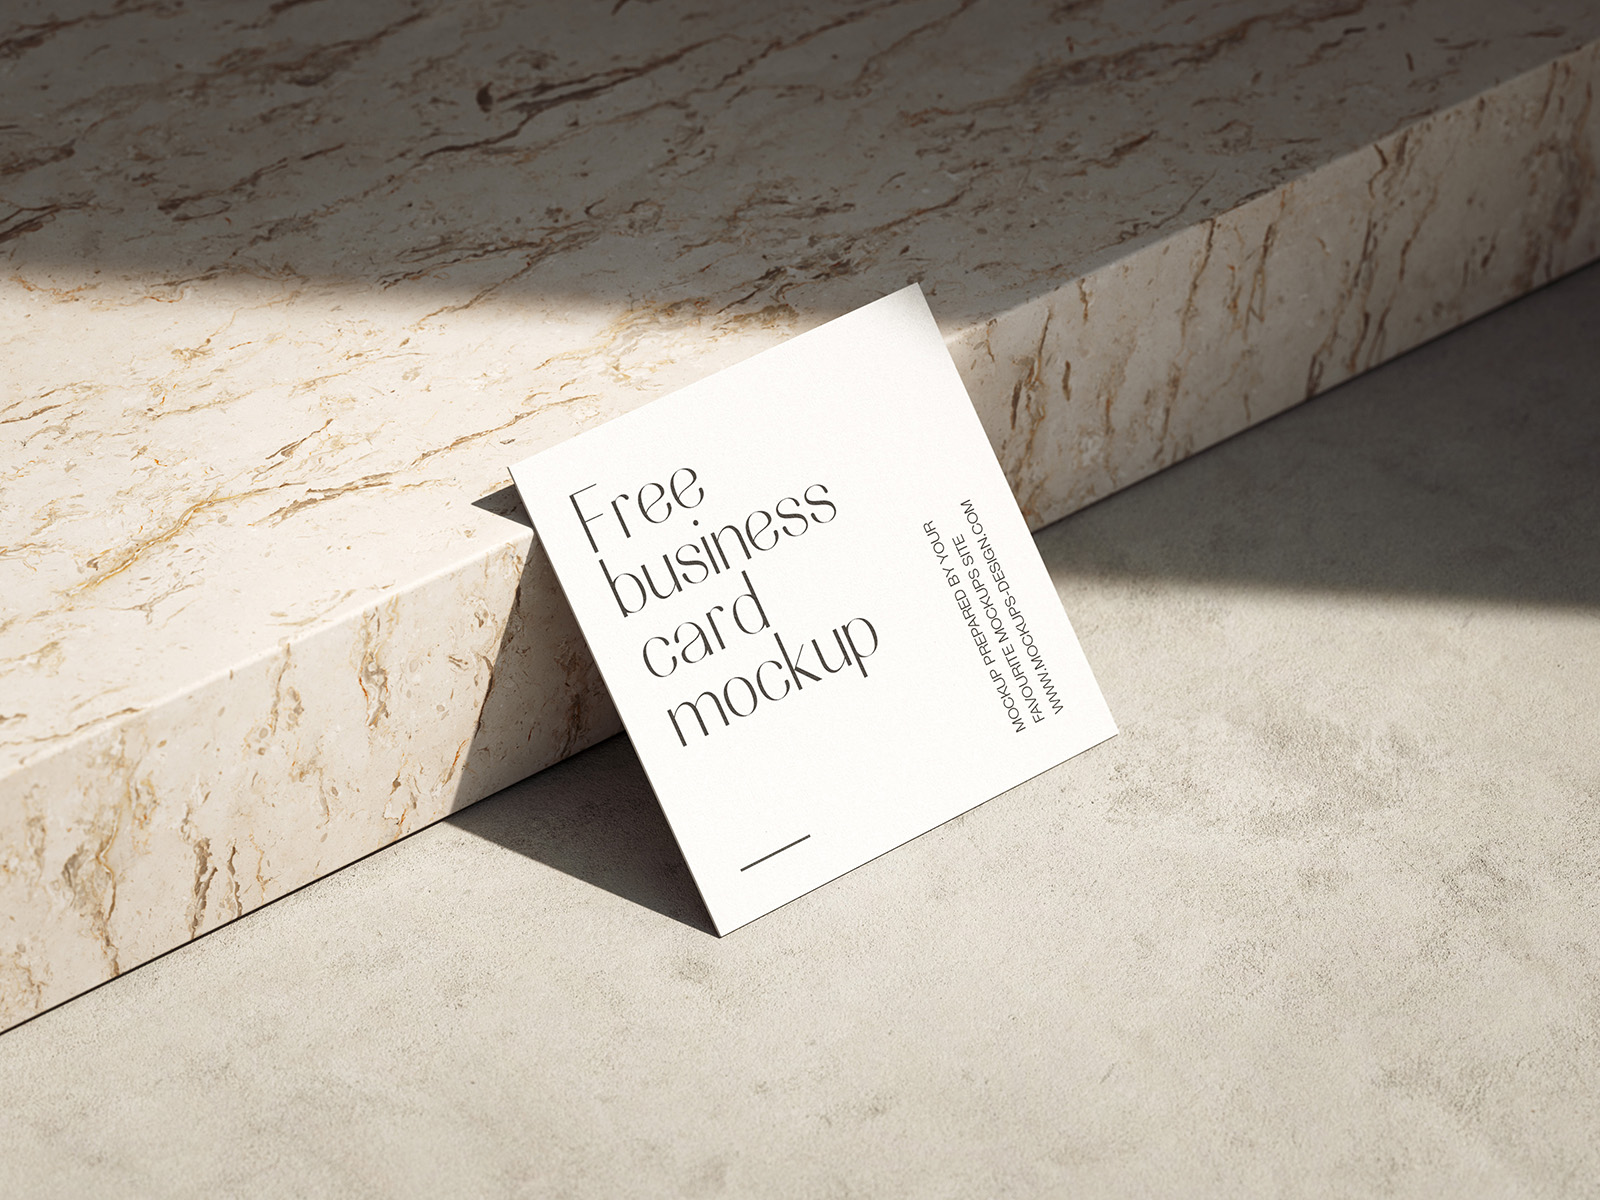 Varies Sights of 4 Business Cards Mockups on Marble Ground FREE PSD